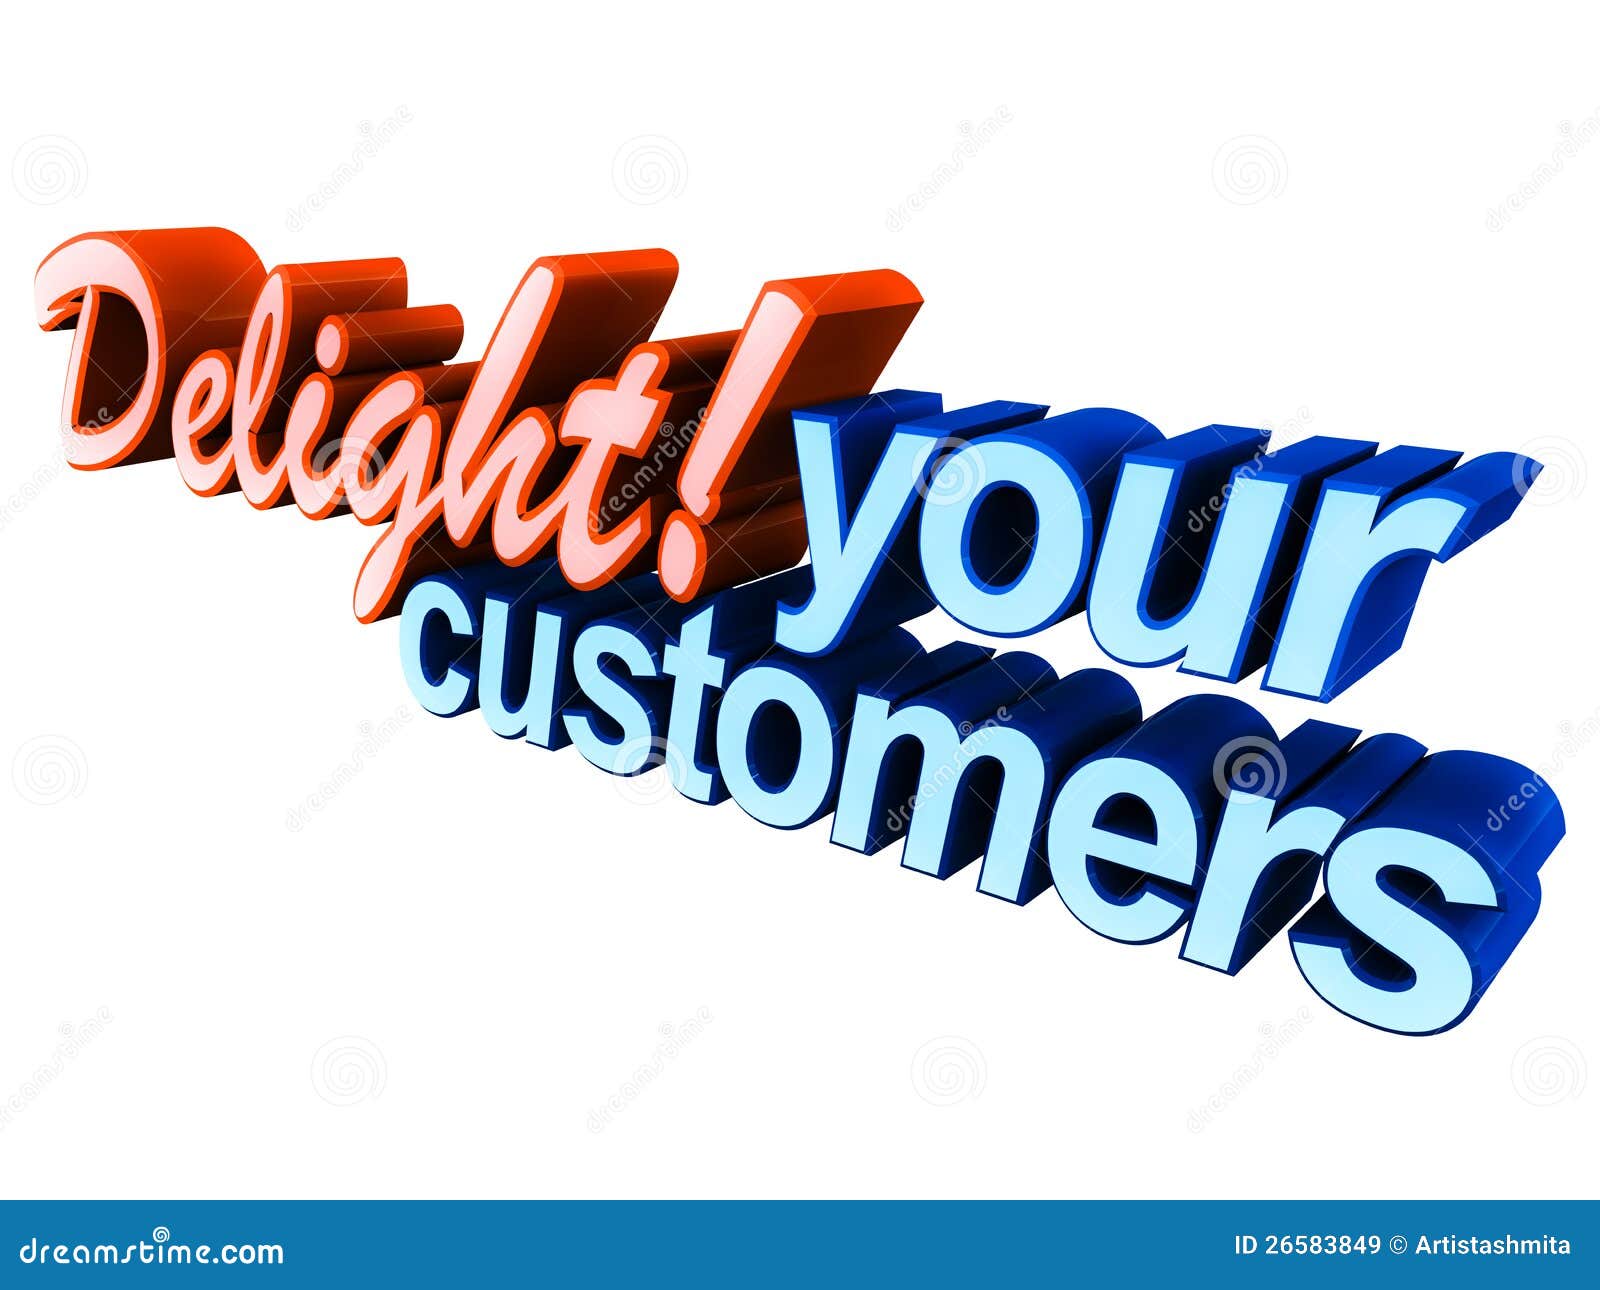 delight your customers